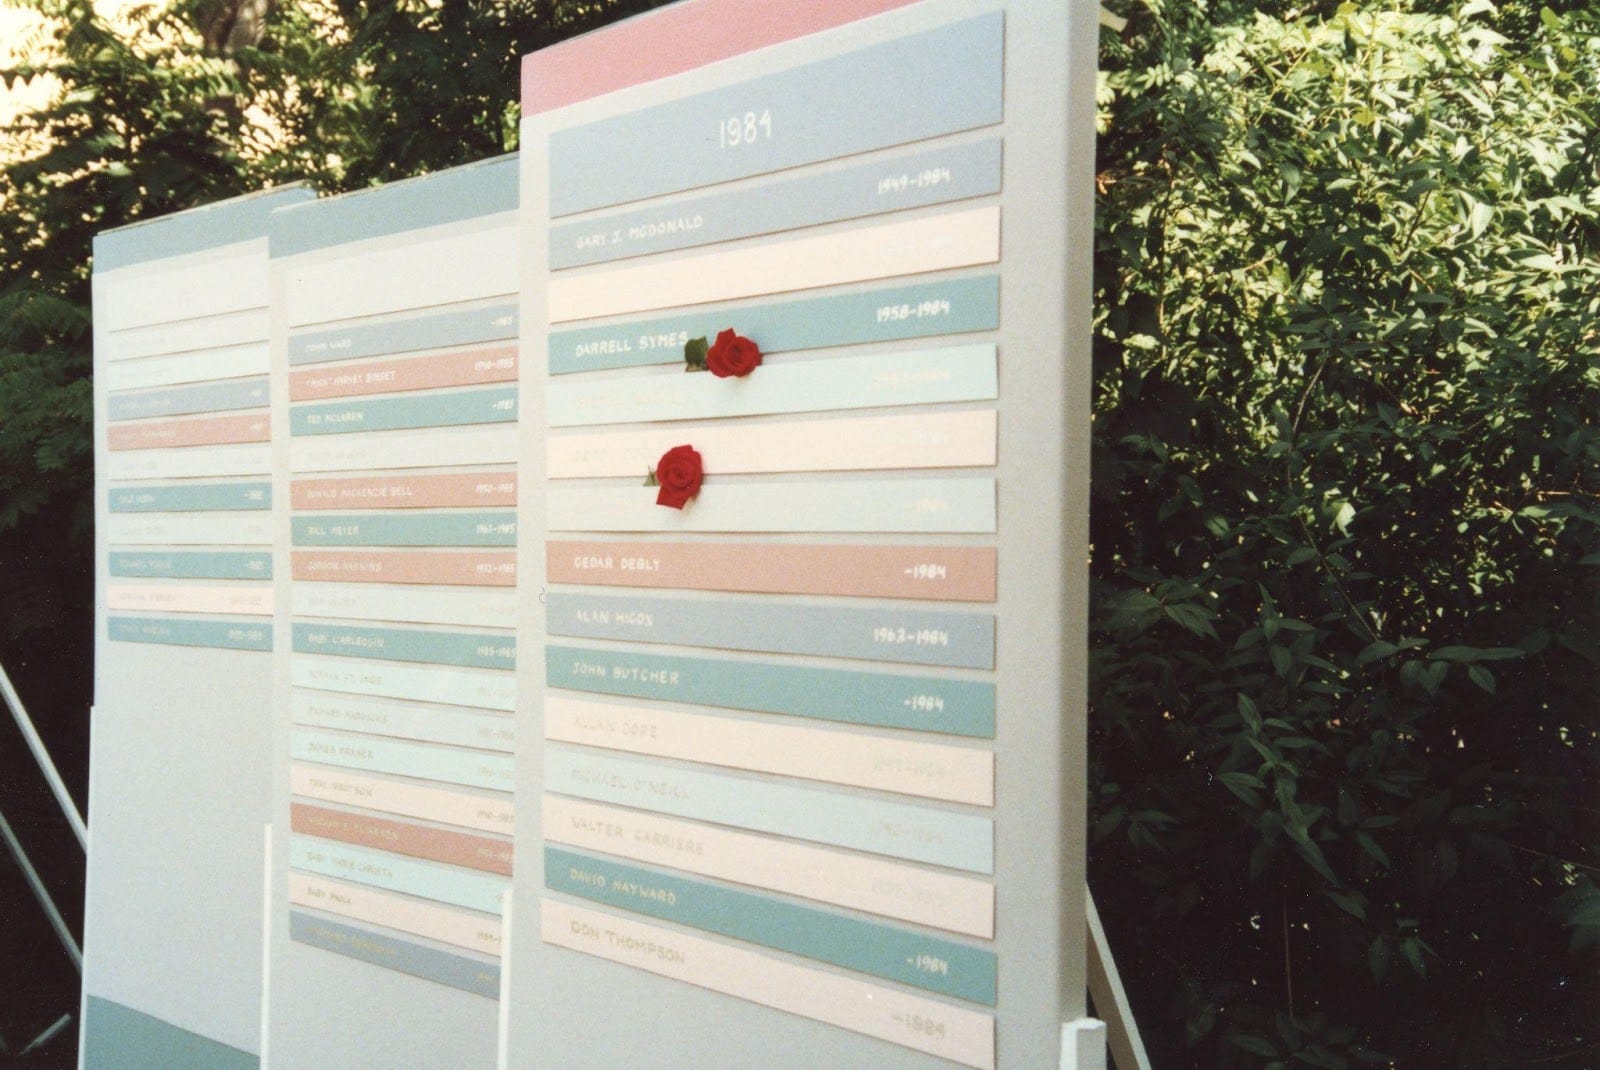 Three panels of an AIDS memorial, labelled ‘1981.’ On each panel, there are a number of rectangular plaques arranged horizontally. Each plaque includes a person’s name and the date of death; some also include dates of birth. The memorial is light grey with accents in pastel pink, blue, green, and cream.